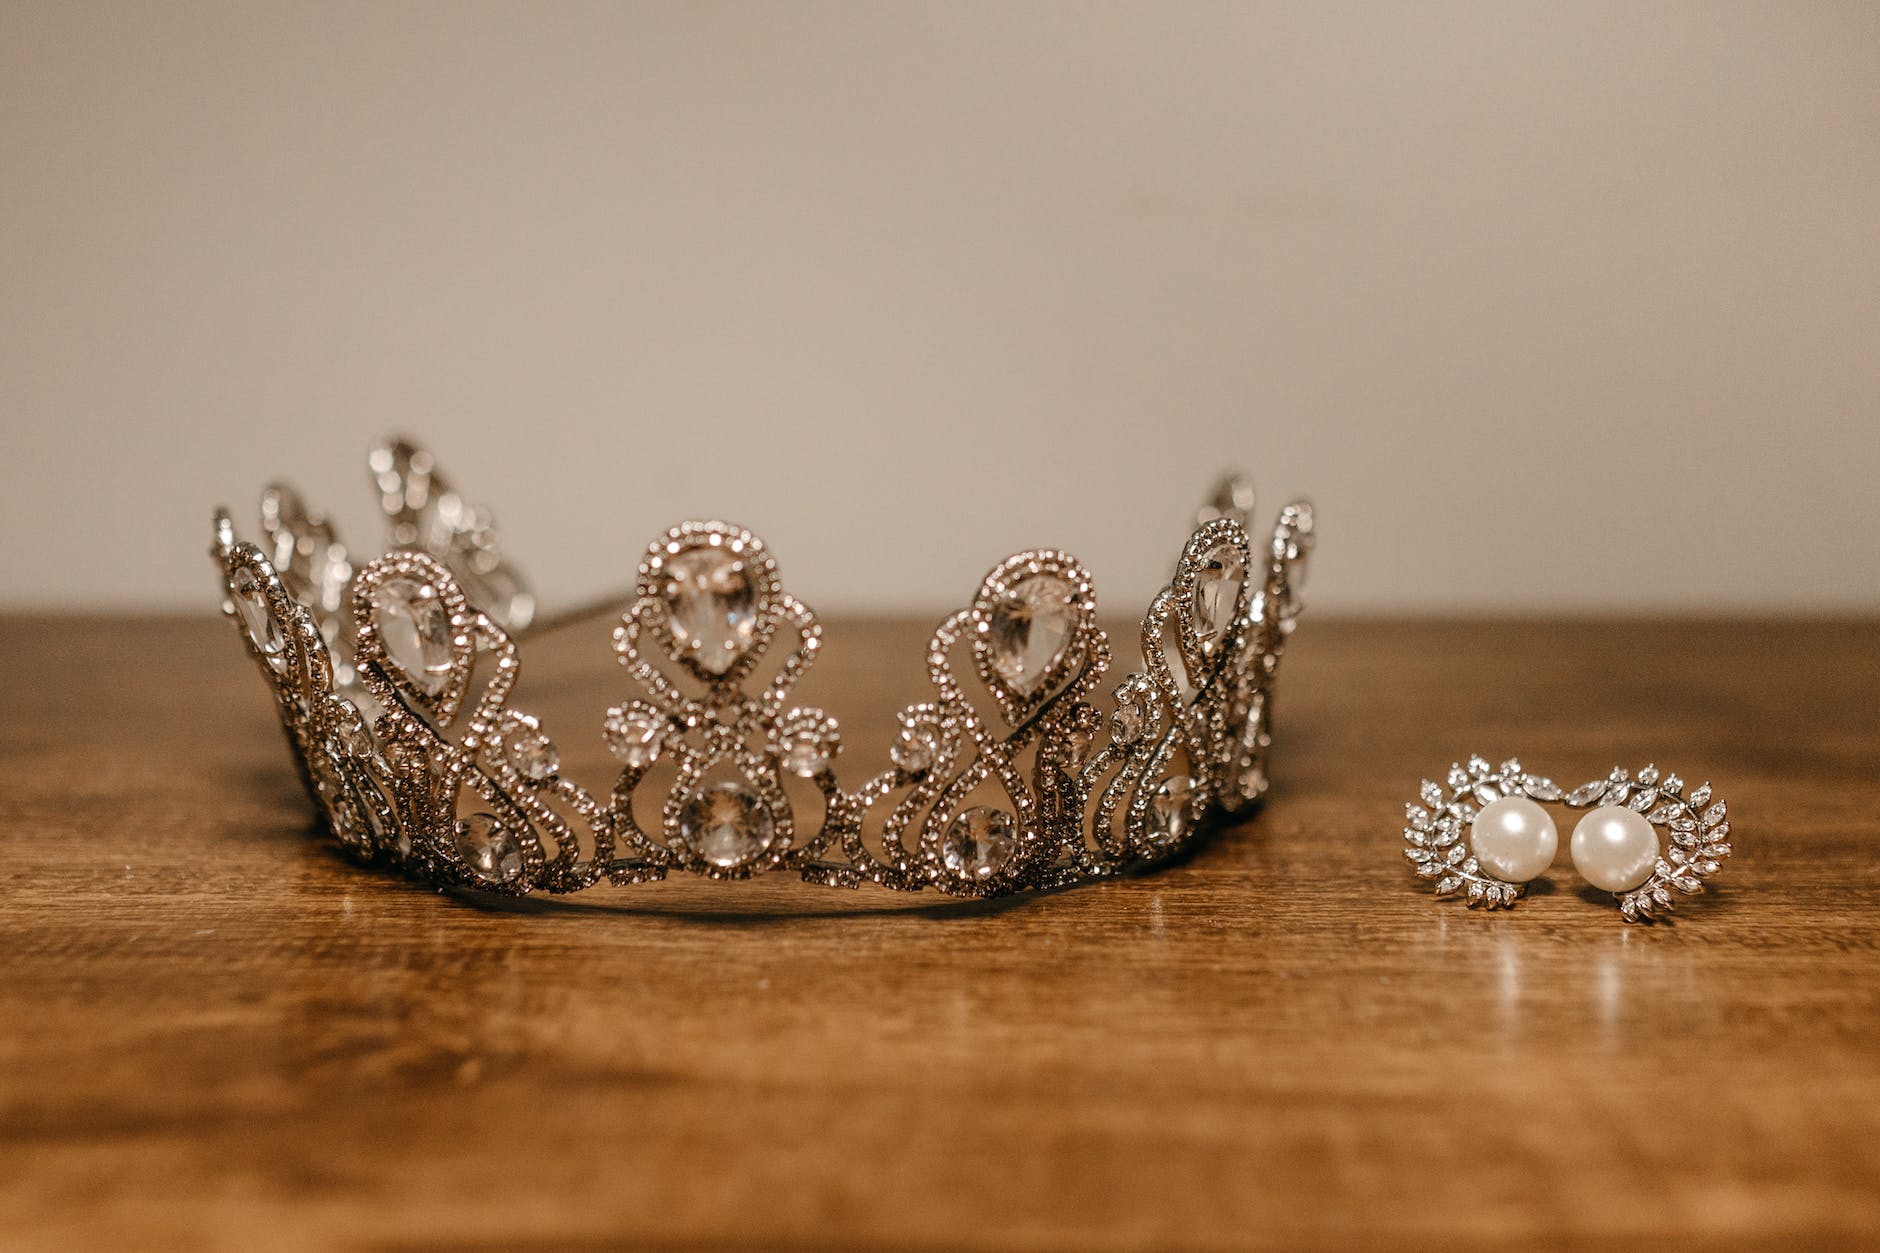 crown and earrings placed on wooden table